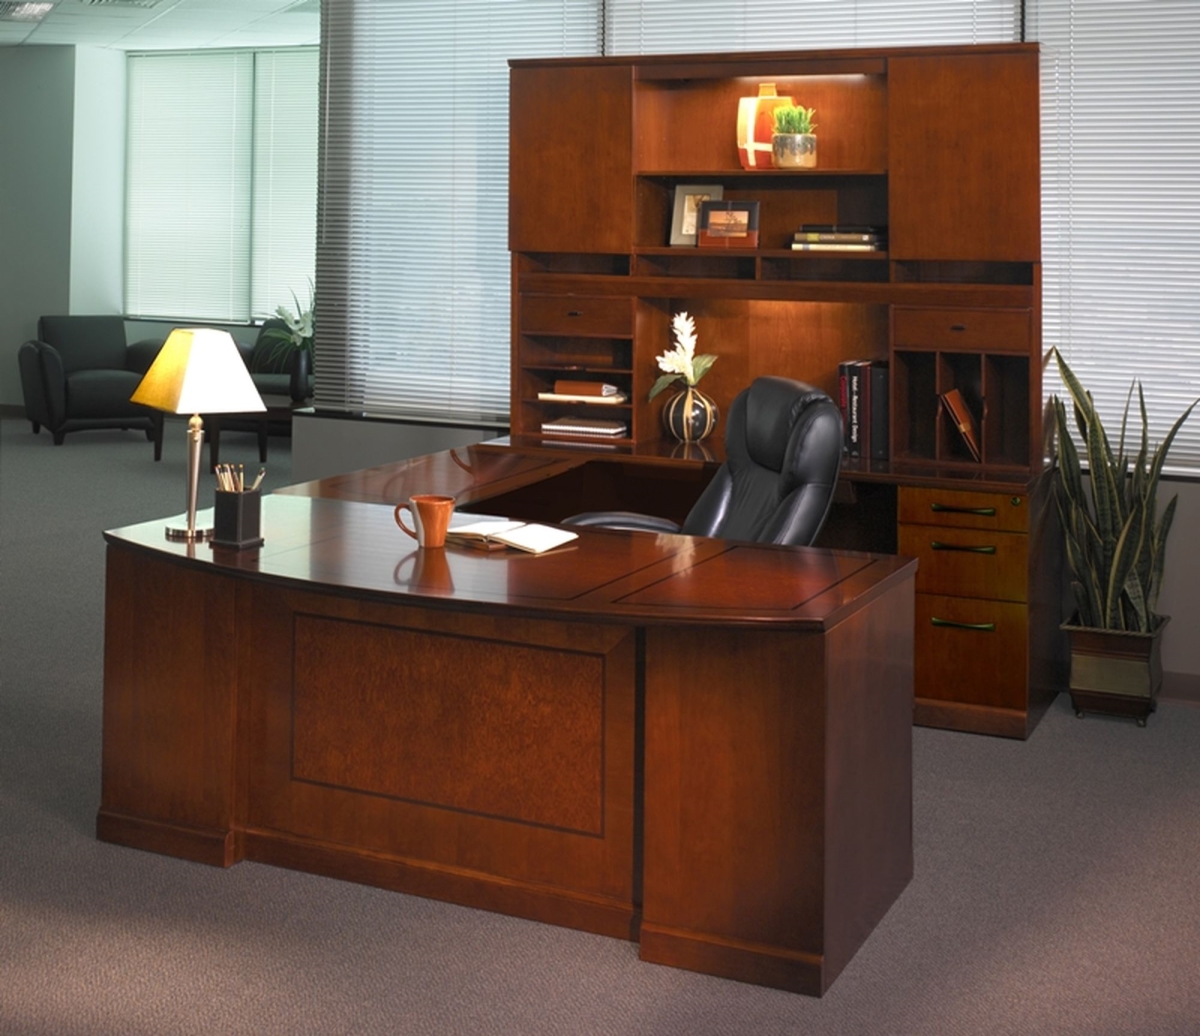 St1scr 72 In. Sorrento Typical 1 U-shaped Executive Office Desk Set, Bourbon Cherry